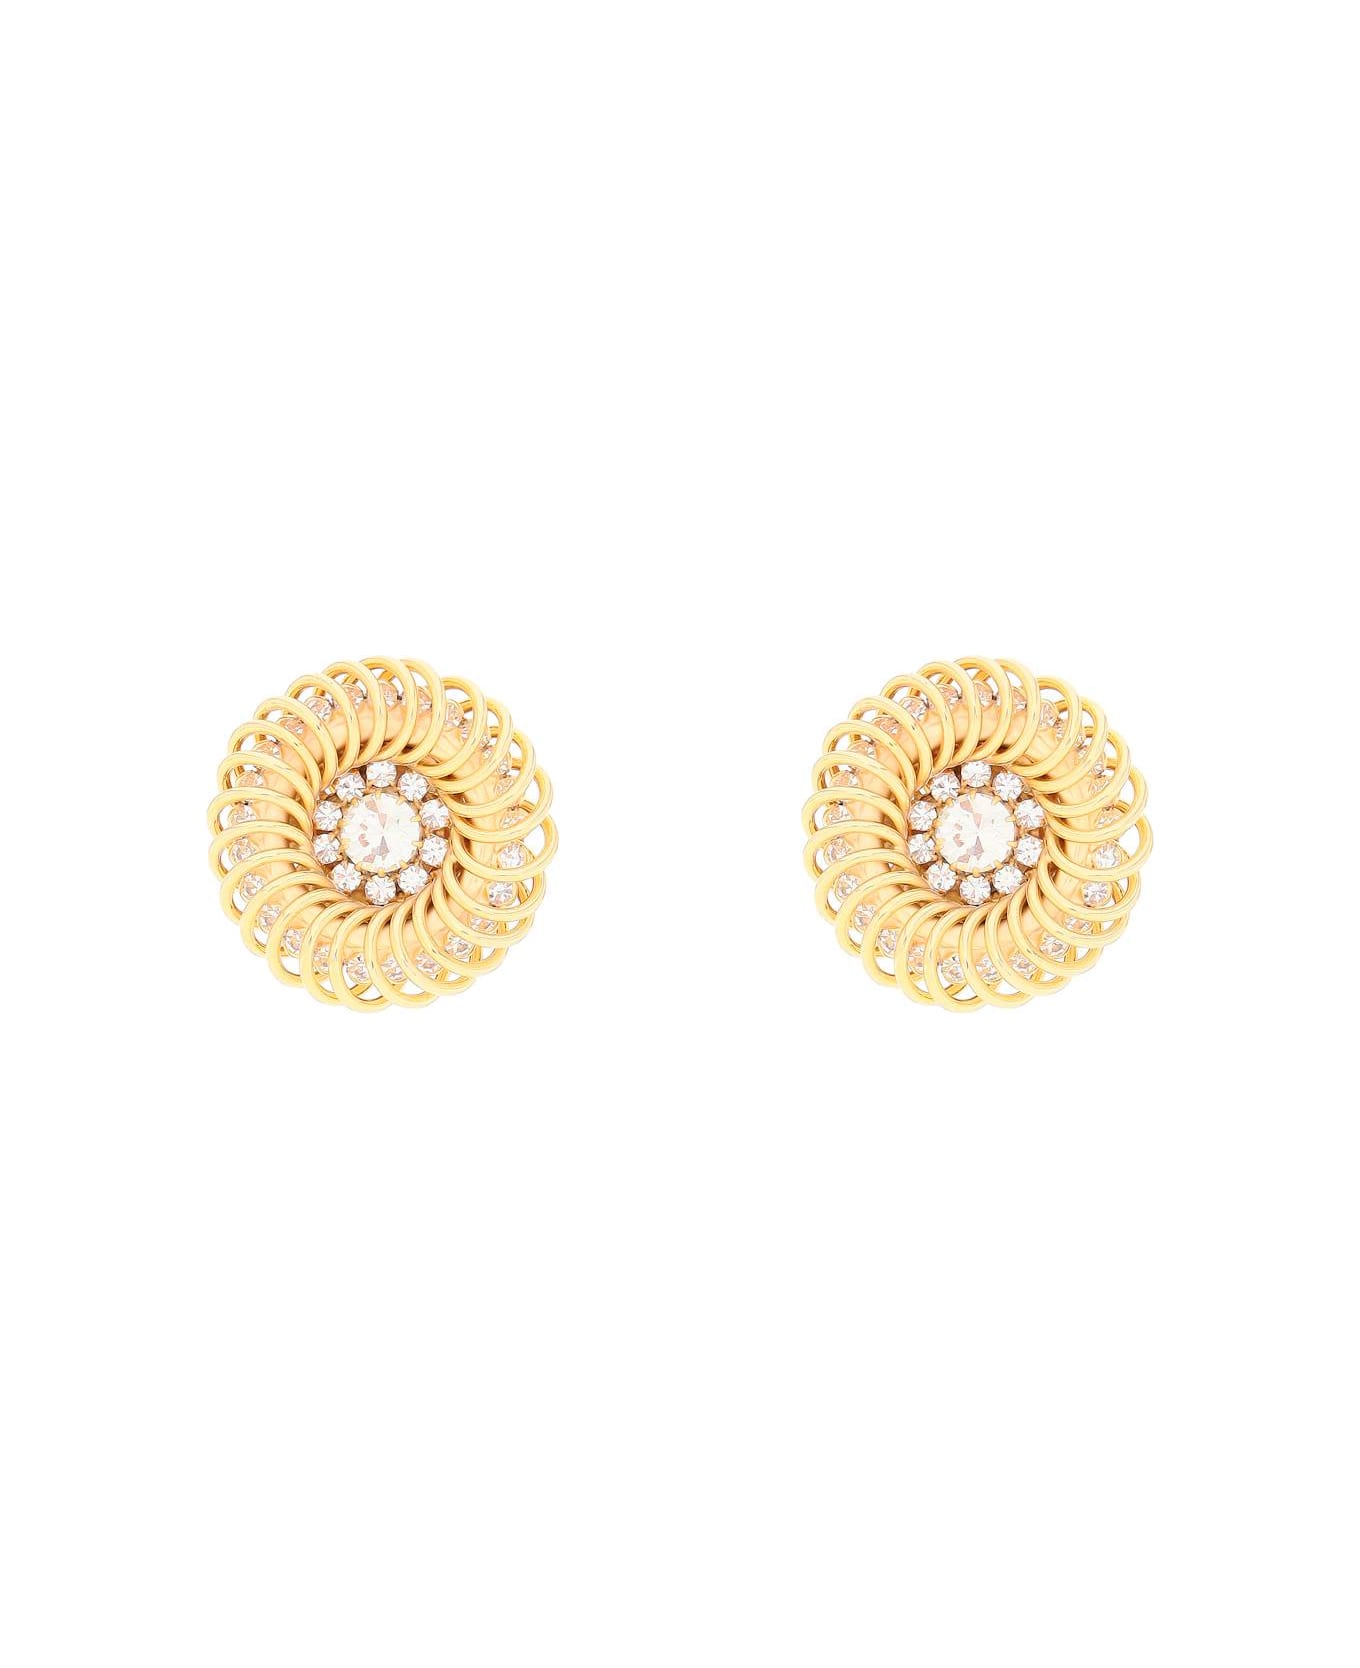 Alessandra Rich Spiral Earrings - CRY GOLD (Gold) イヤリング